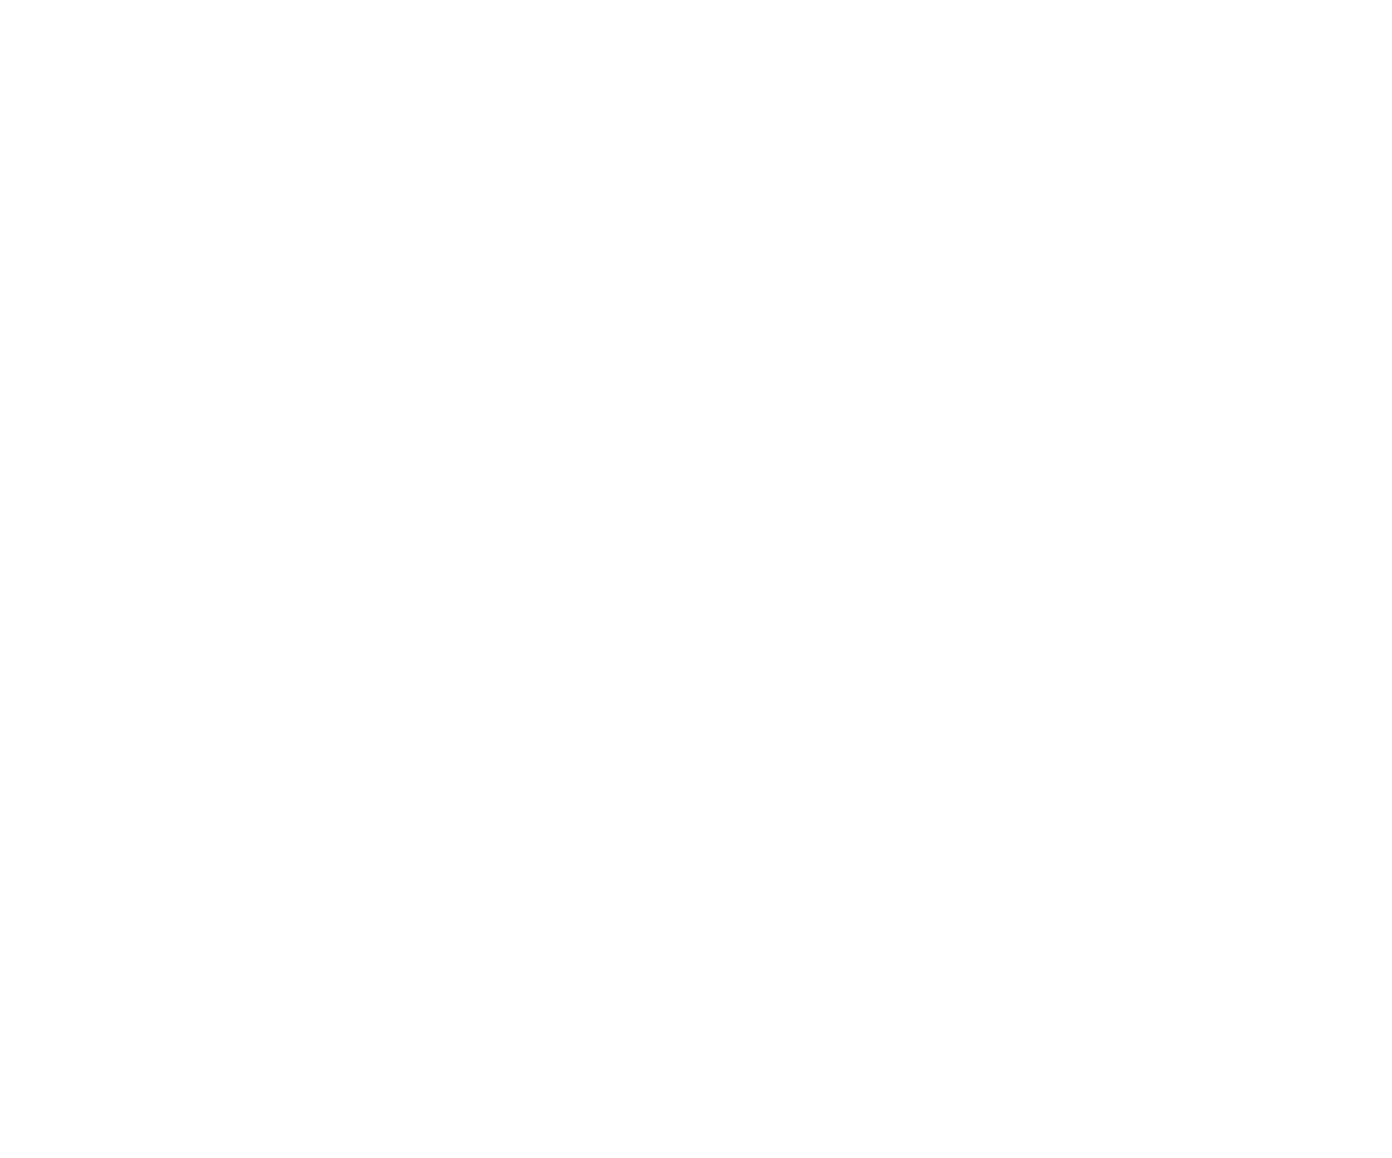 The Farmers Finds